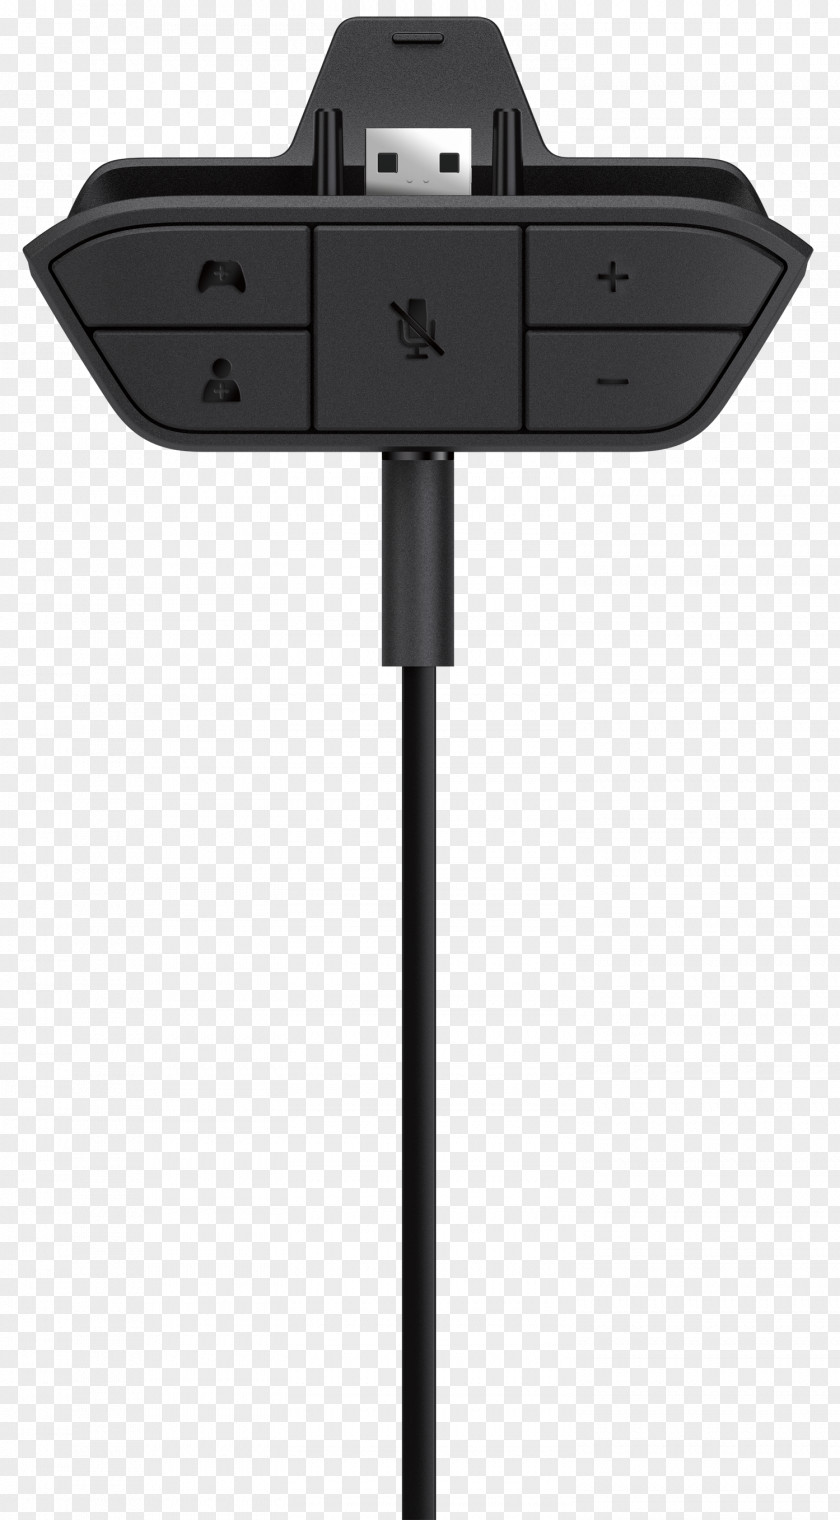 Headphones Xbox One Controller Headset Adapter PNG